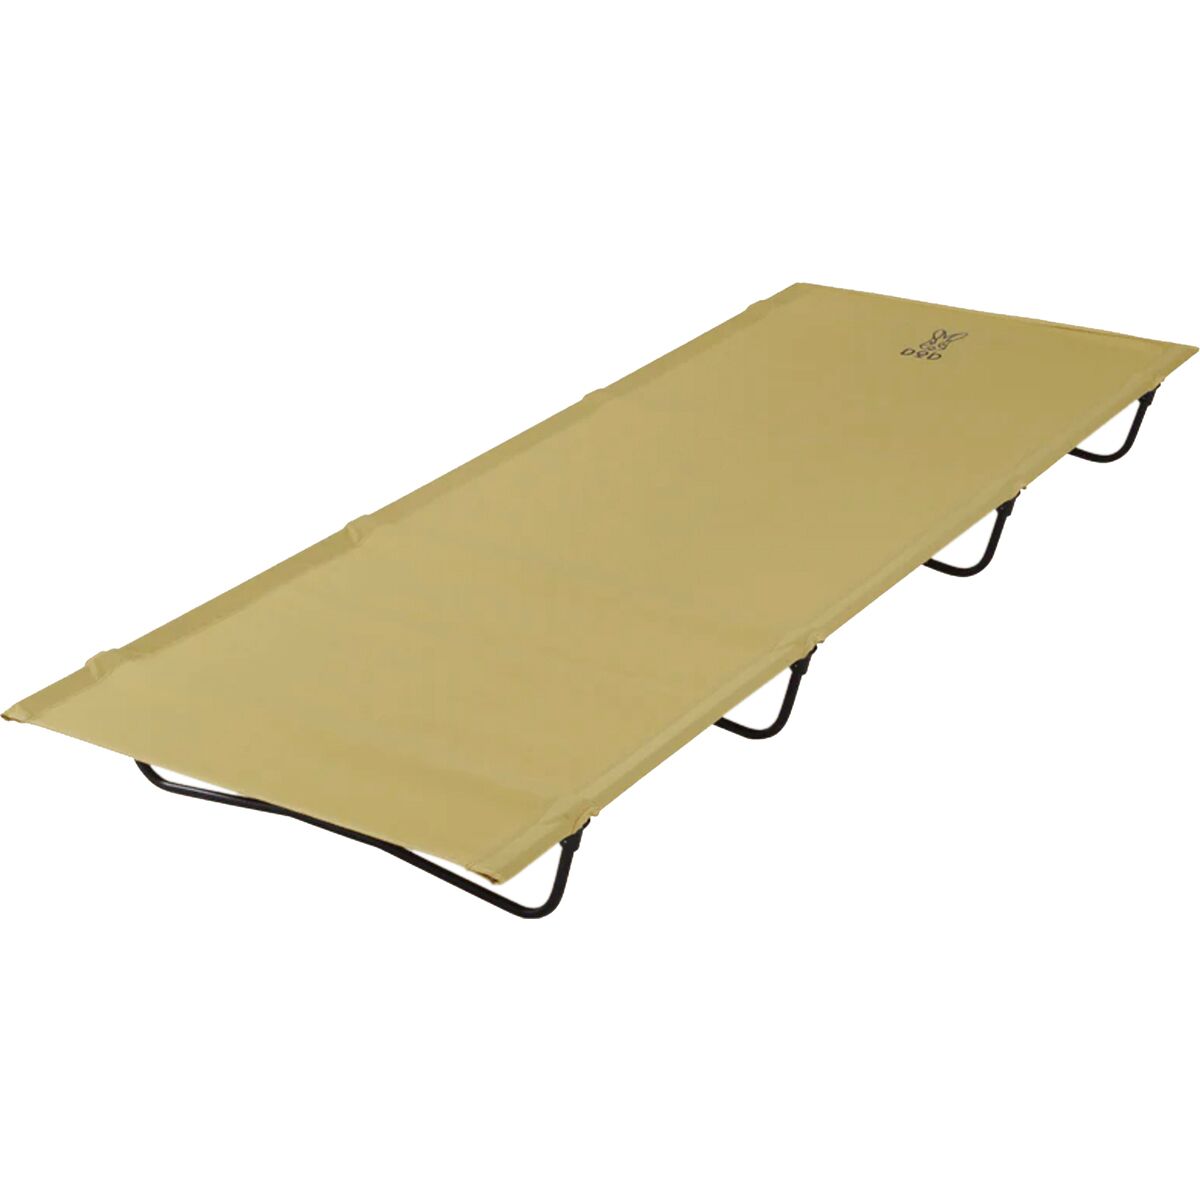 DOD Outdoors Bed In Bag Cot